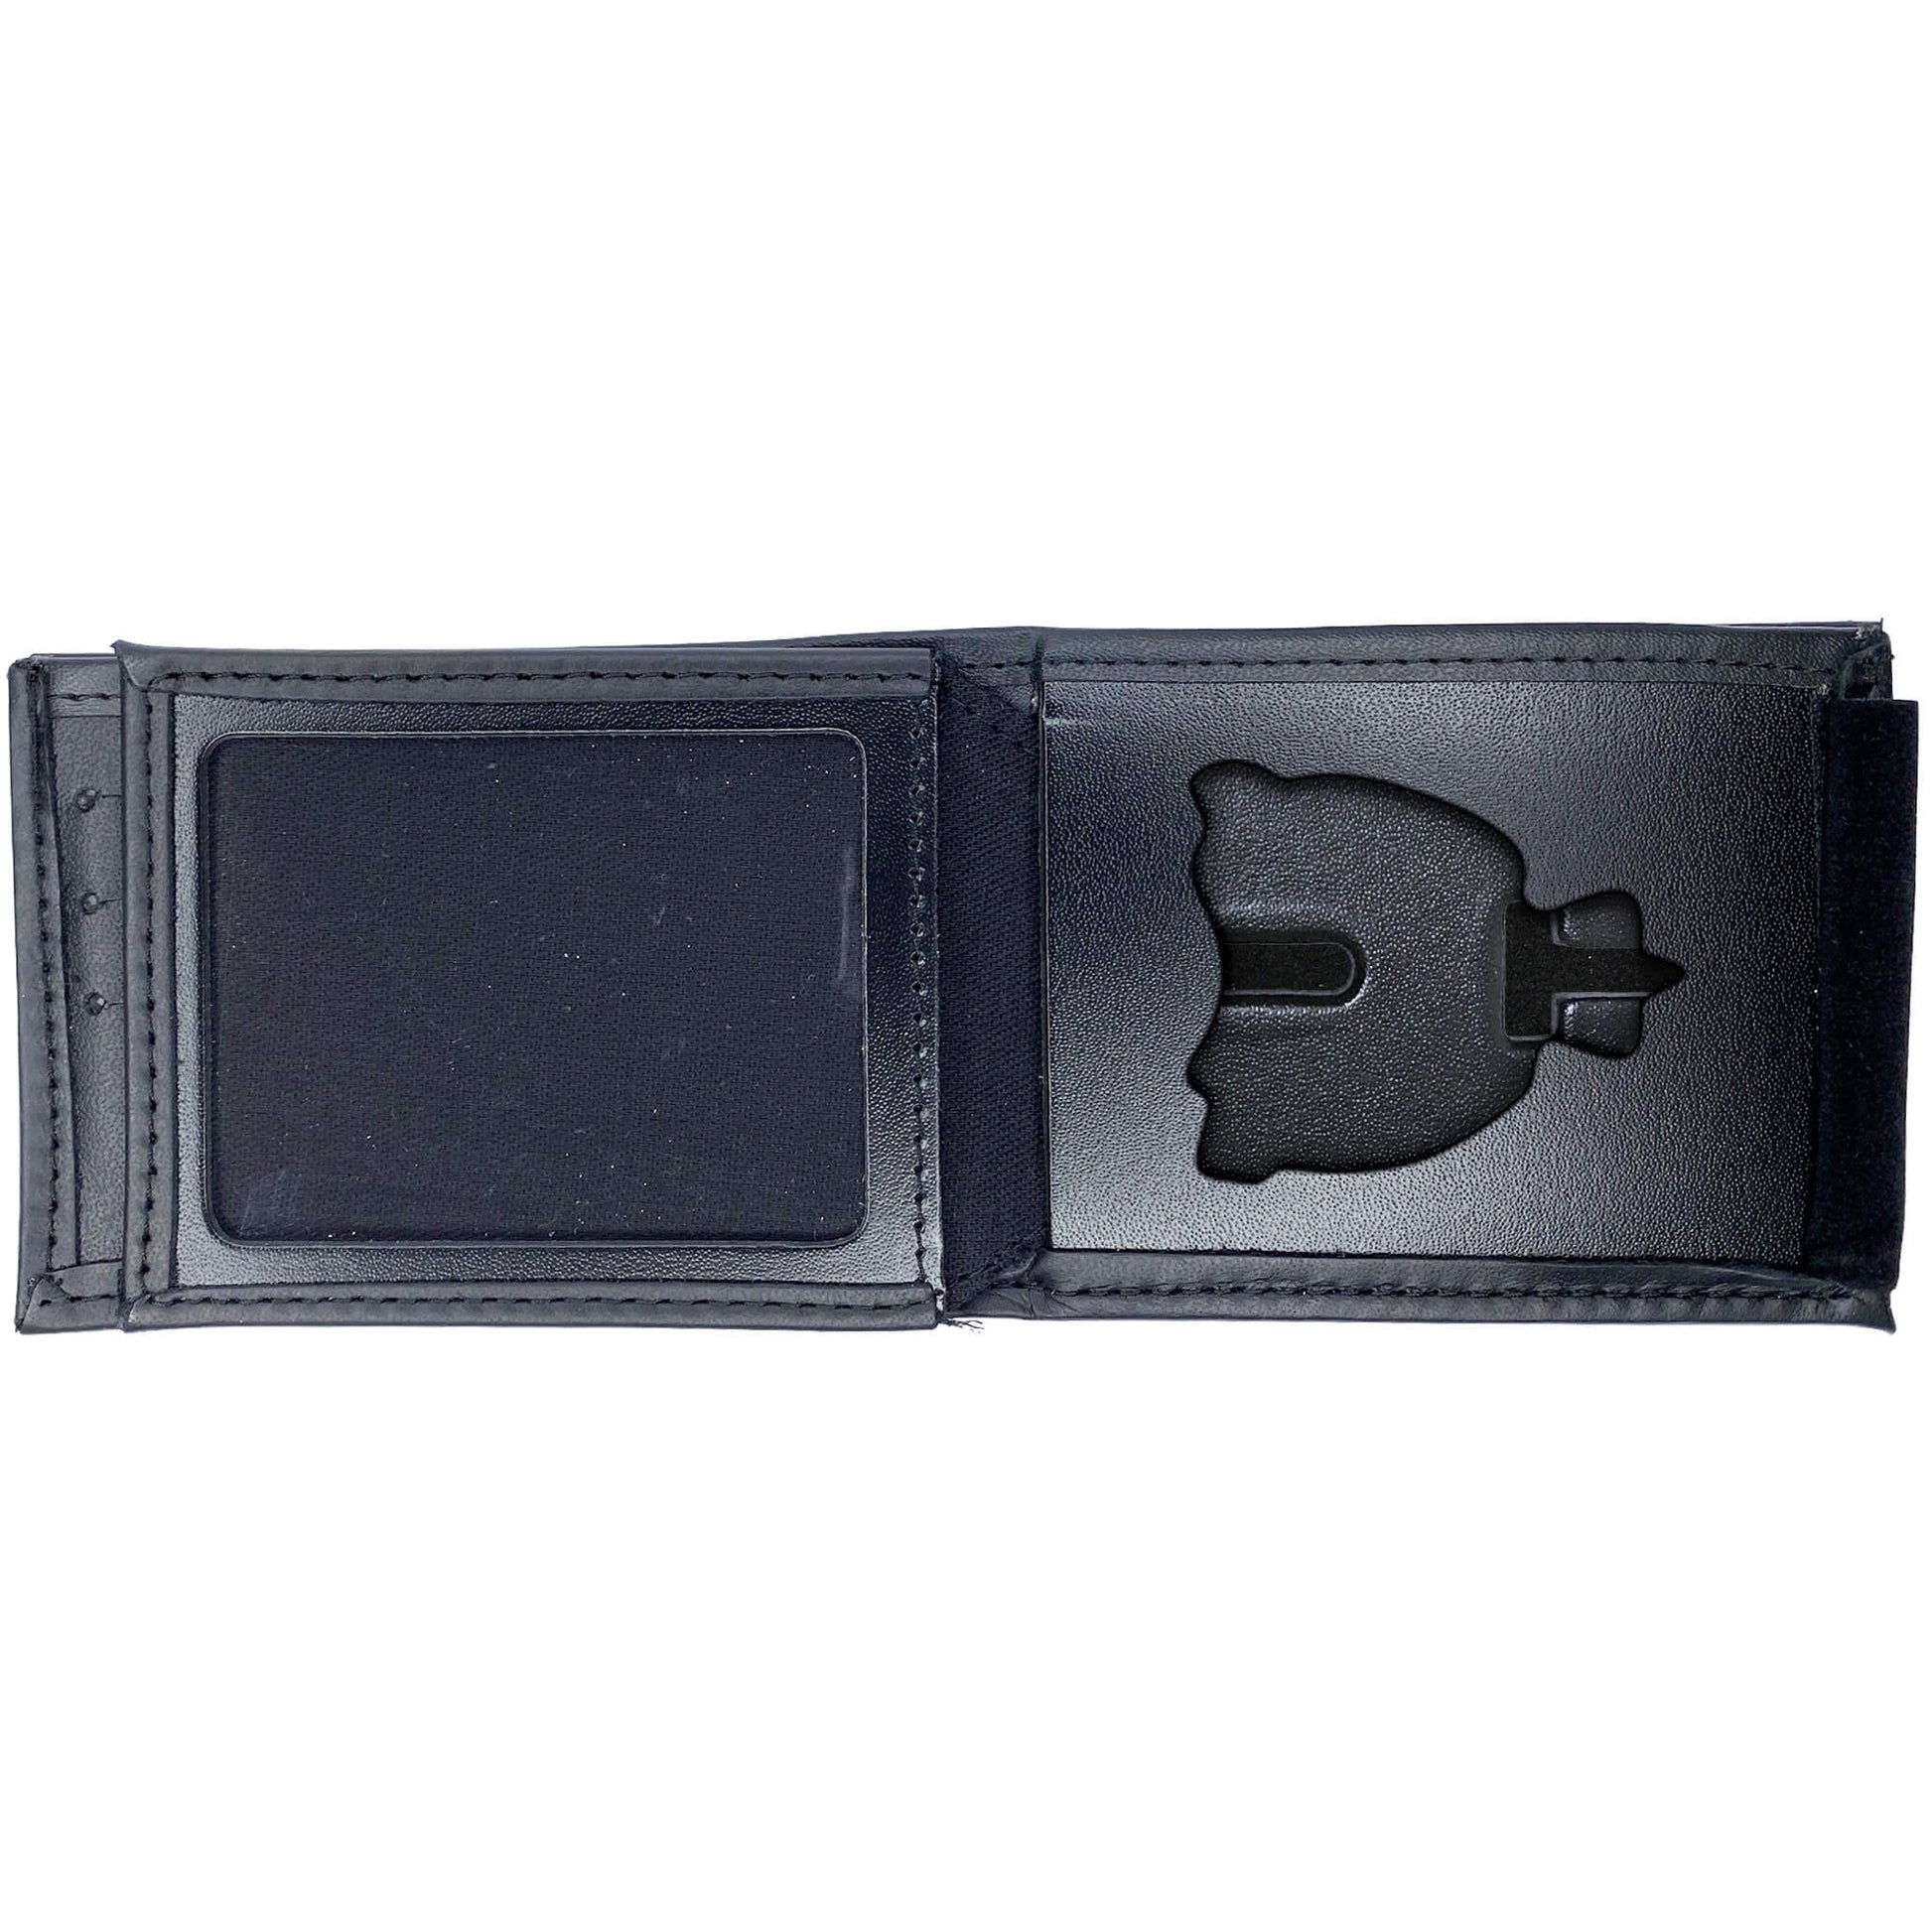 Royal Canadian Mounted Police (RCMP) Hidden Cap Badge Wallet-Perfect Fit-911 Duty Gear Canada